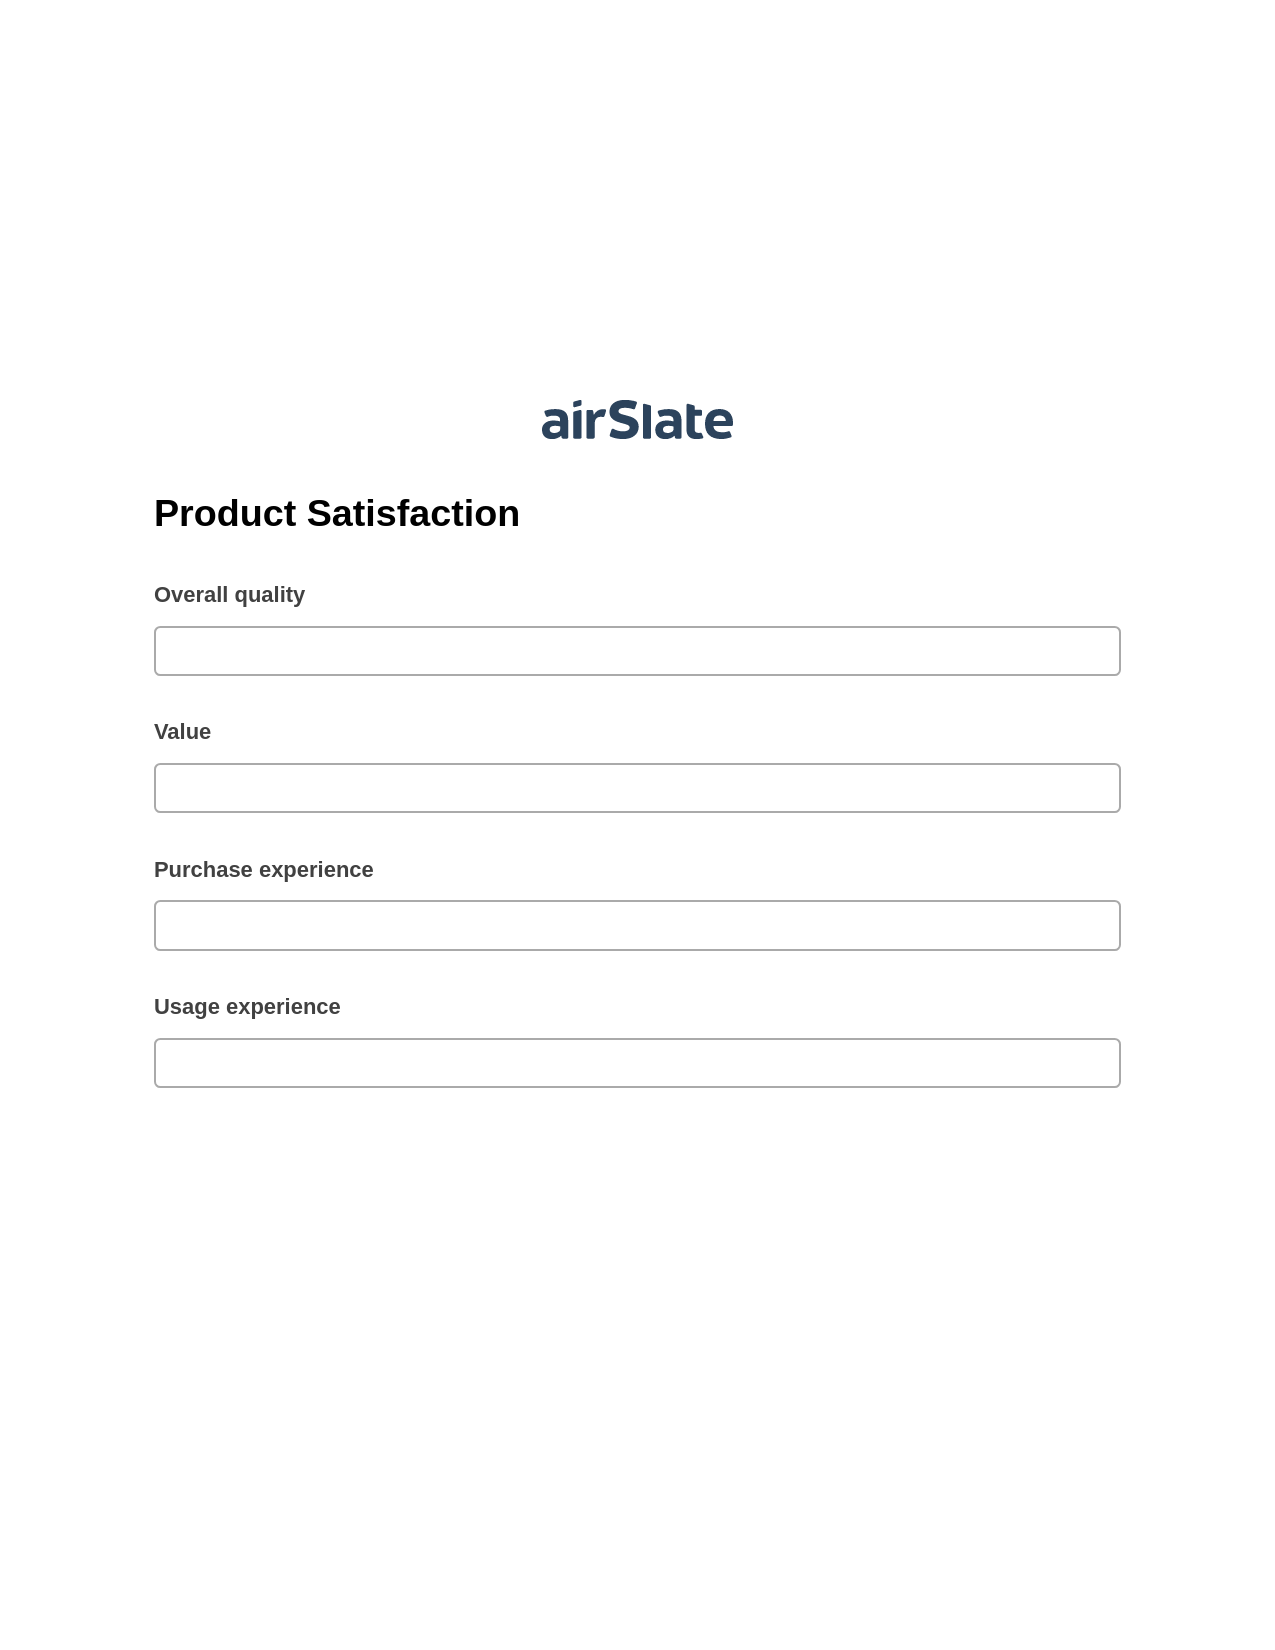 Product Satisfaction Pre-fill from another Slate Bot, Create NetSuite Records Bot, Export to Smartsheet